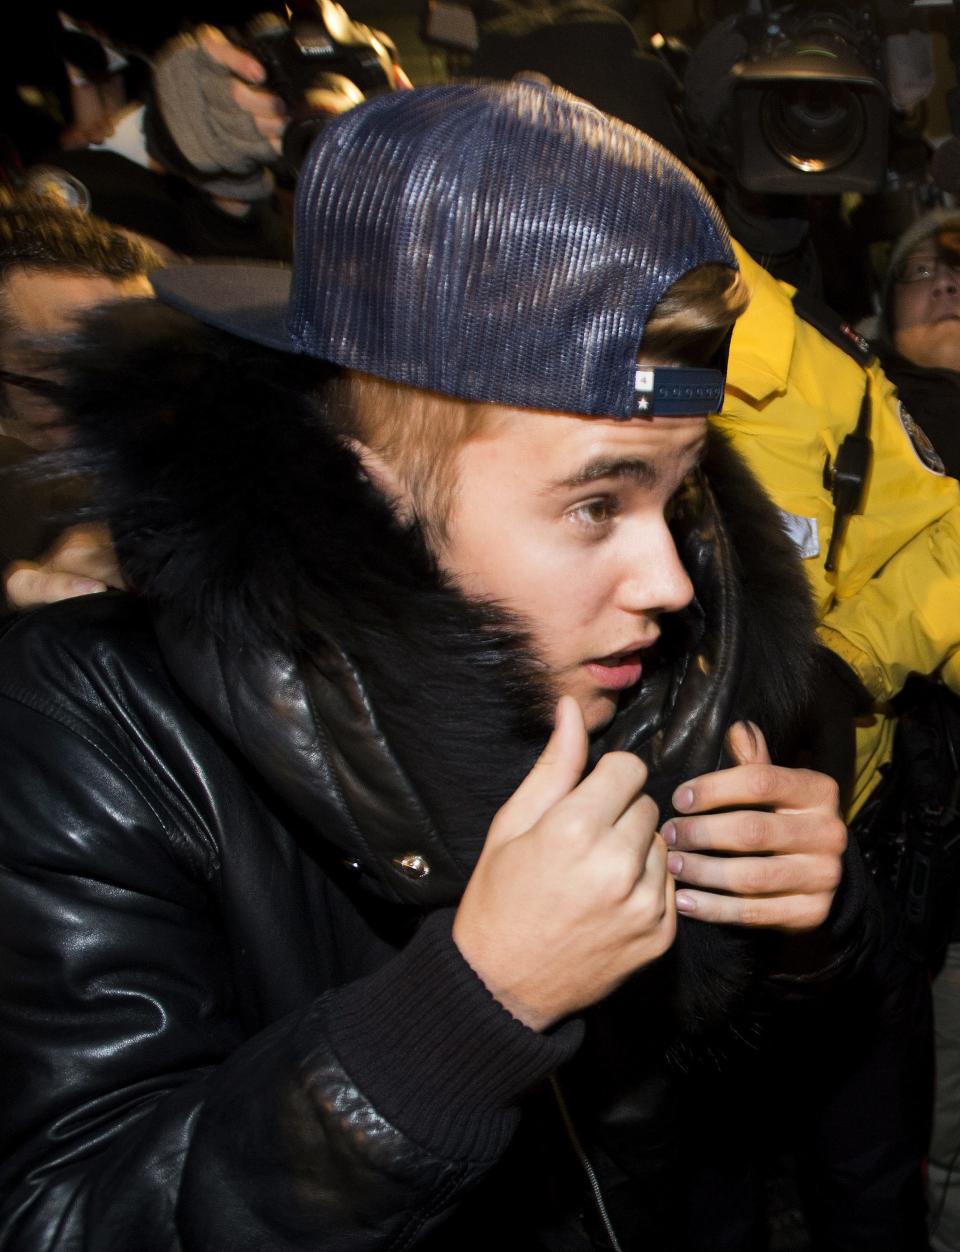 File-This Jan. 29, 2014, file photo shows Canadian musician Justin Bieber being swarmed by media and police officers as he turns himself in to city police for an expected assault charge, in Toronto. Bieber is giving Toronto Mayor Rob Ford a brief respite as Canada's favorite bad boy and butt of all jokes. But the comparison may not be a fair one. The 19-year-old teen idol is facing the equivalent of a misdemeanor assault charge. Ford has admitted smoking crack while in a drunken stupor and is being sued for supposedly orchestrating the jailhouse beating of his sister's ex-boyfriend. (AP Photo/The Canadian Press, Nathan Denette, File)